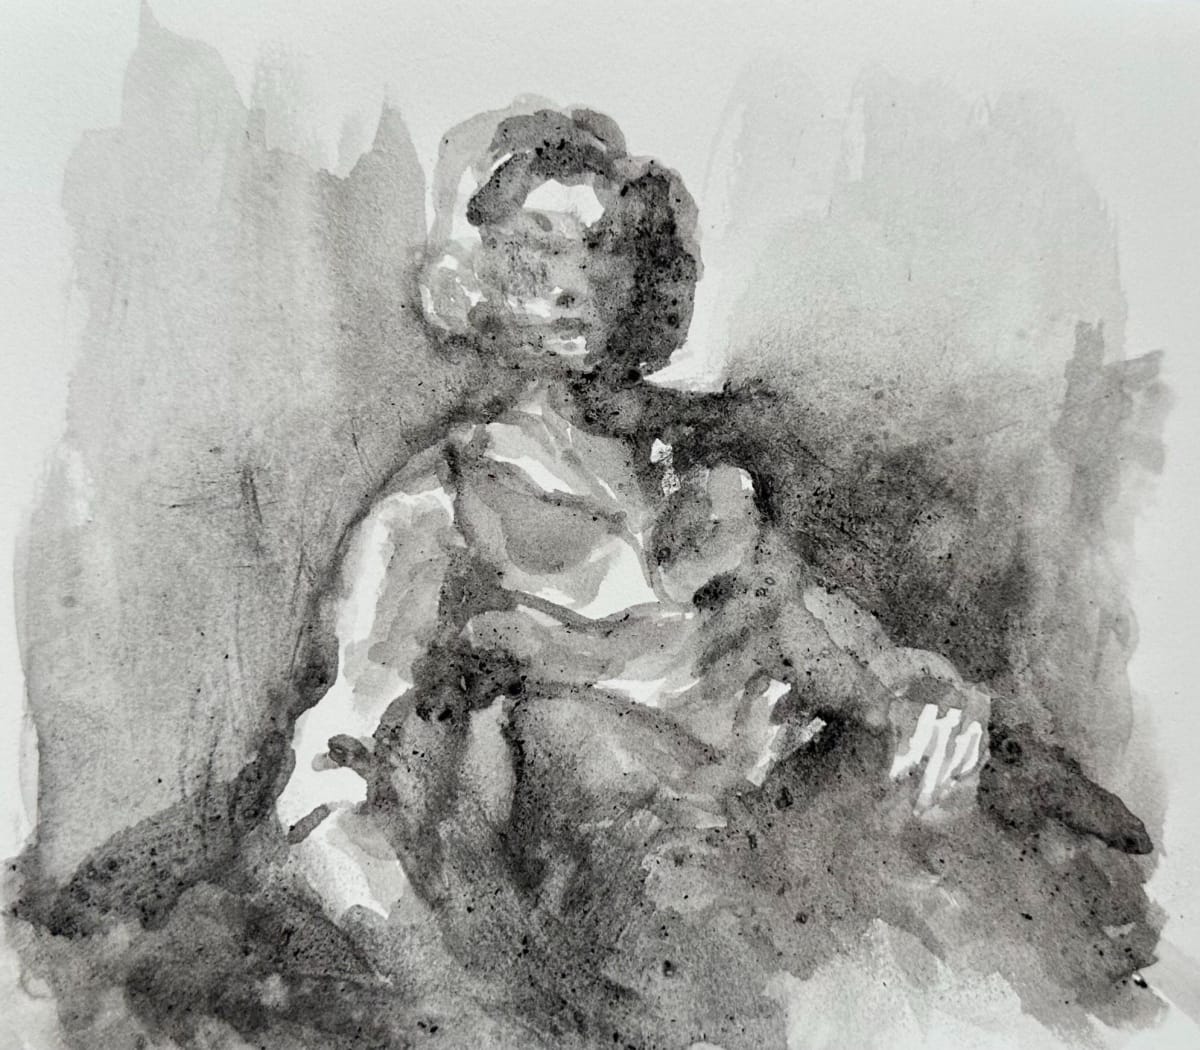 Monochrome Reverie by Lorna Herf  Image: A quiet moment in black and white. Hand ground watercolor pigment made from oak and horsetail charcoal.